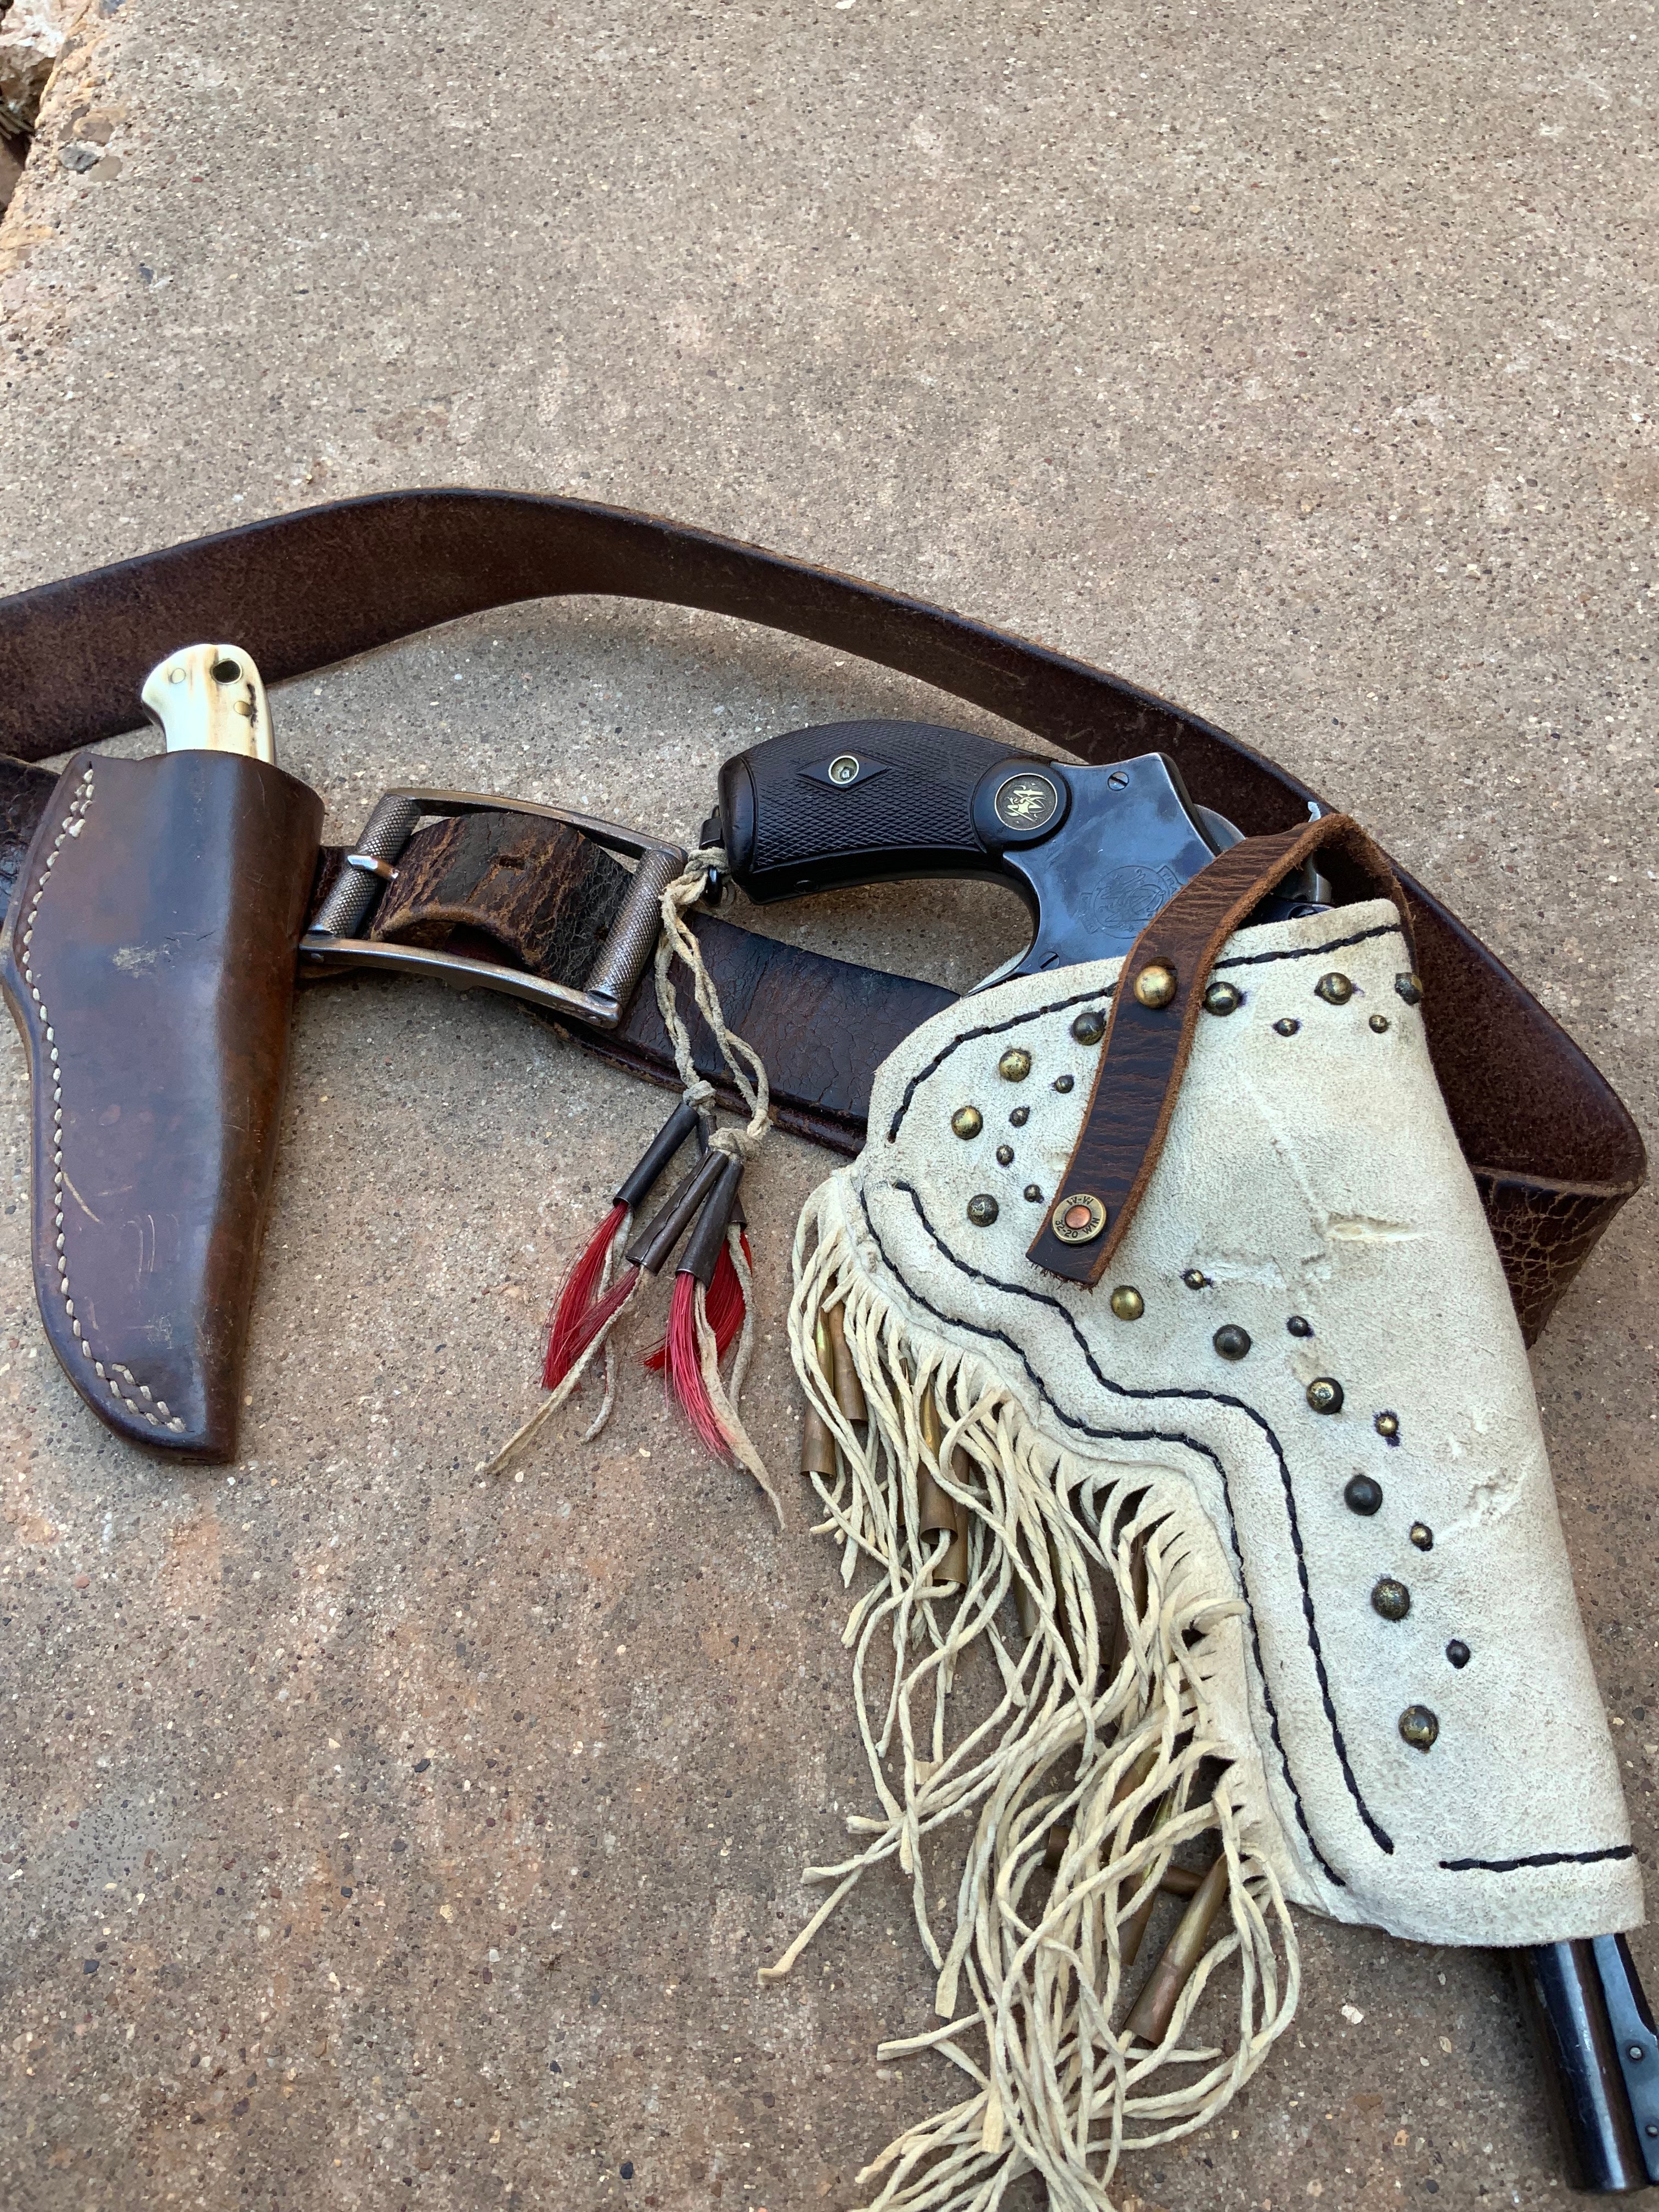 100 year old Smith & Wesson full rig - chambered 32-20 Win ... with a fantastic story!